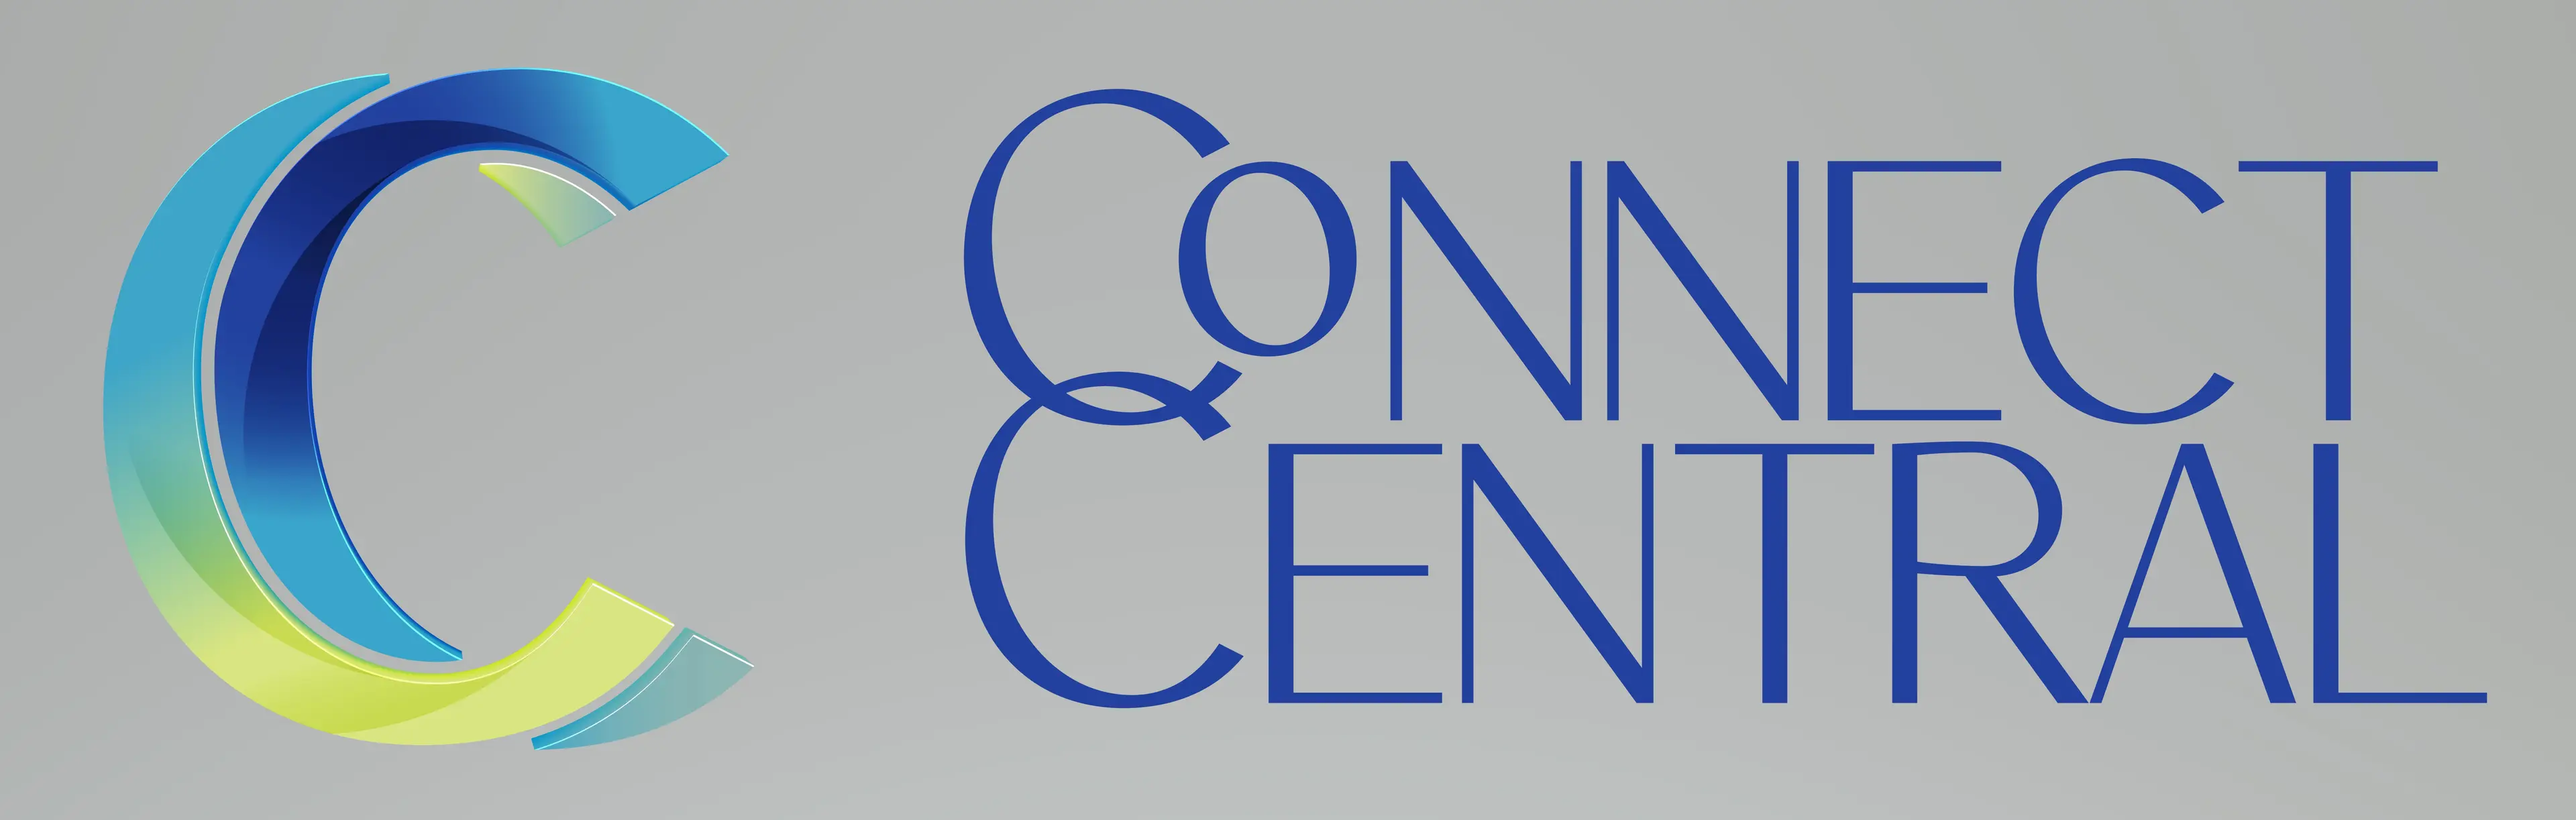 Connect Central